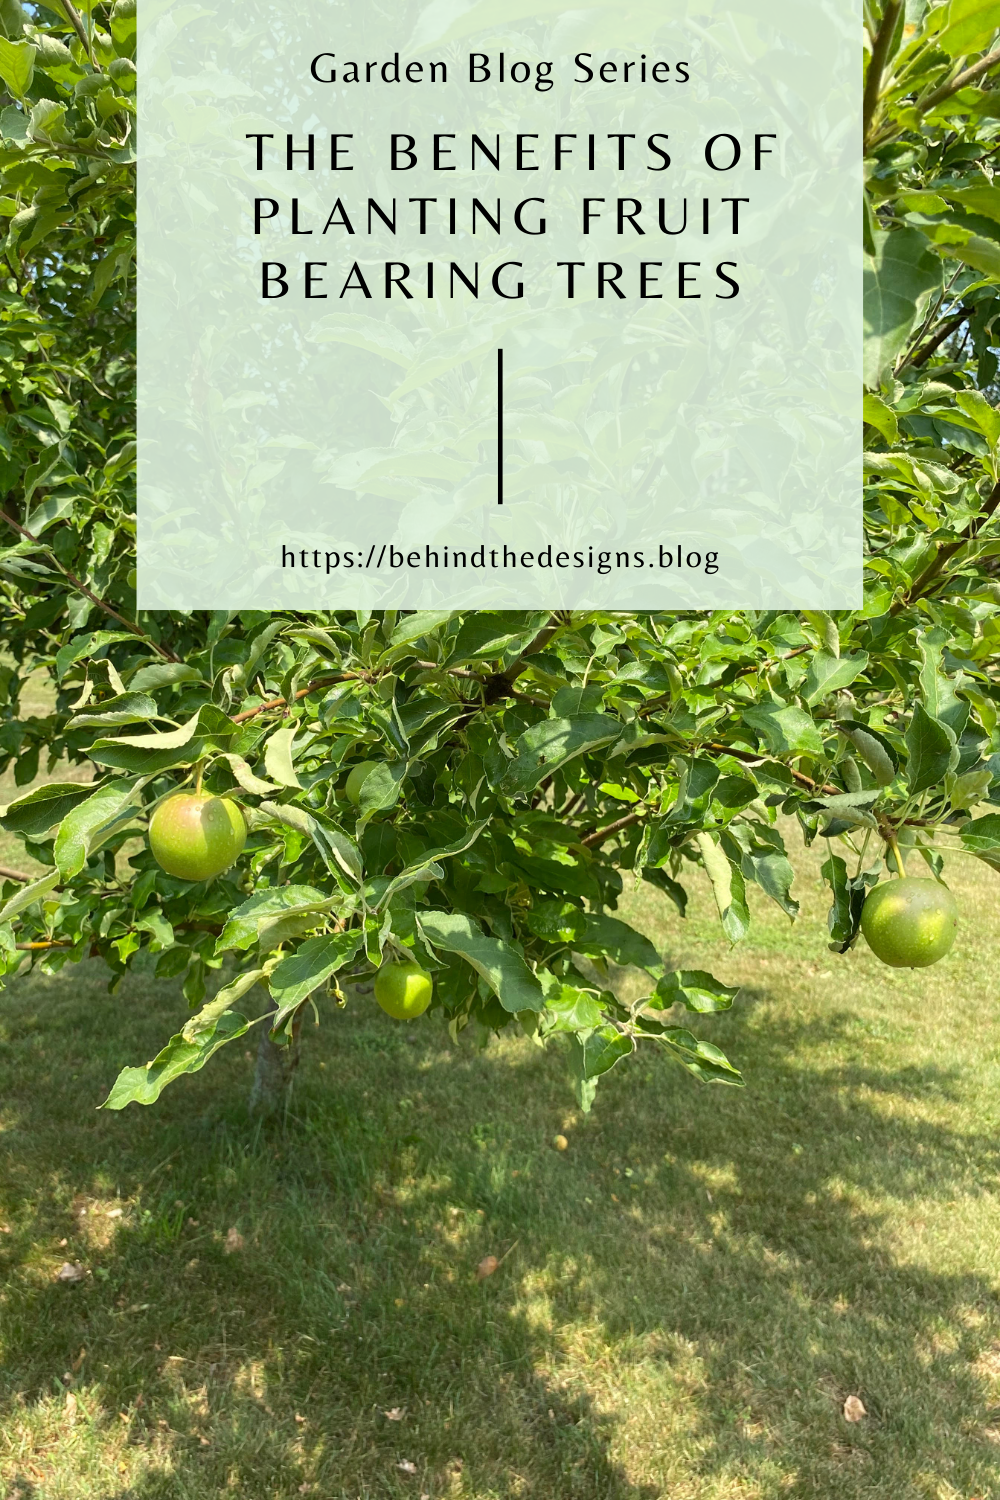 The Benefits of Planting Fruit Bearing Trees